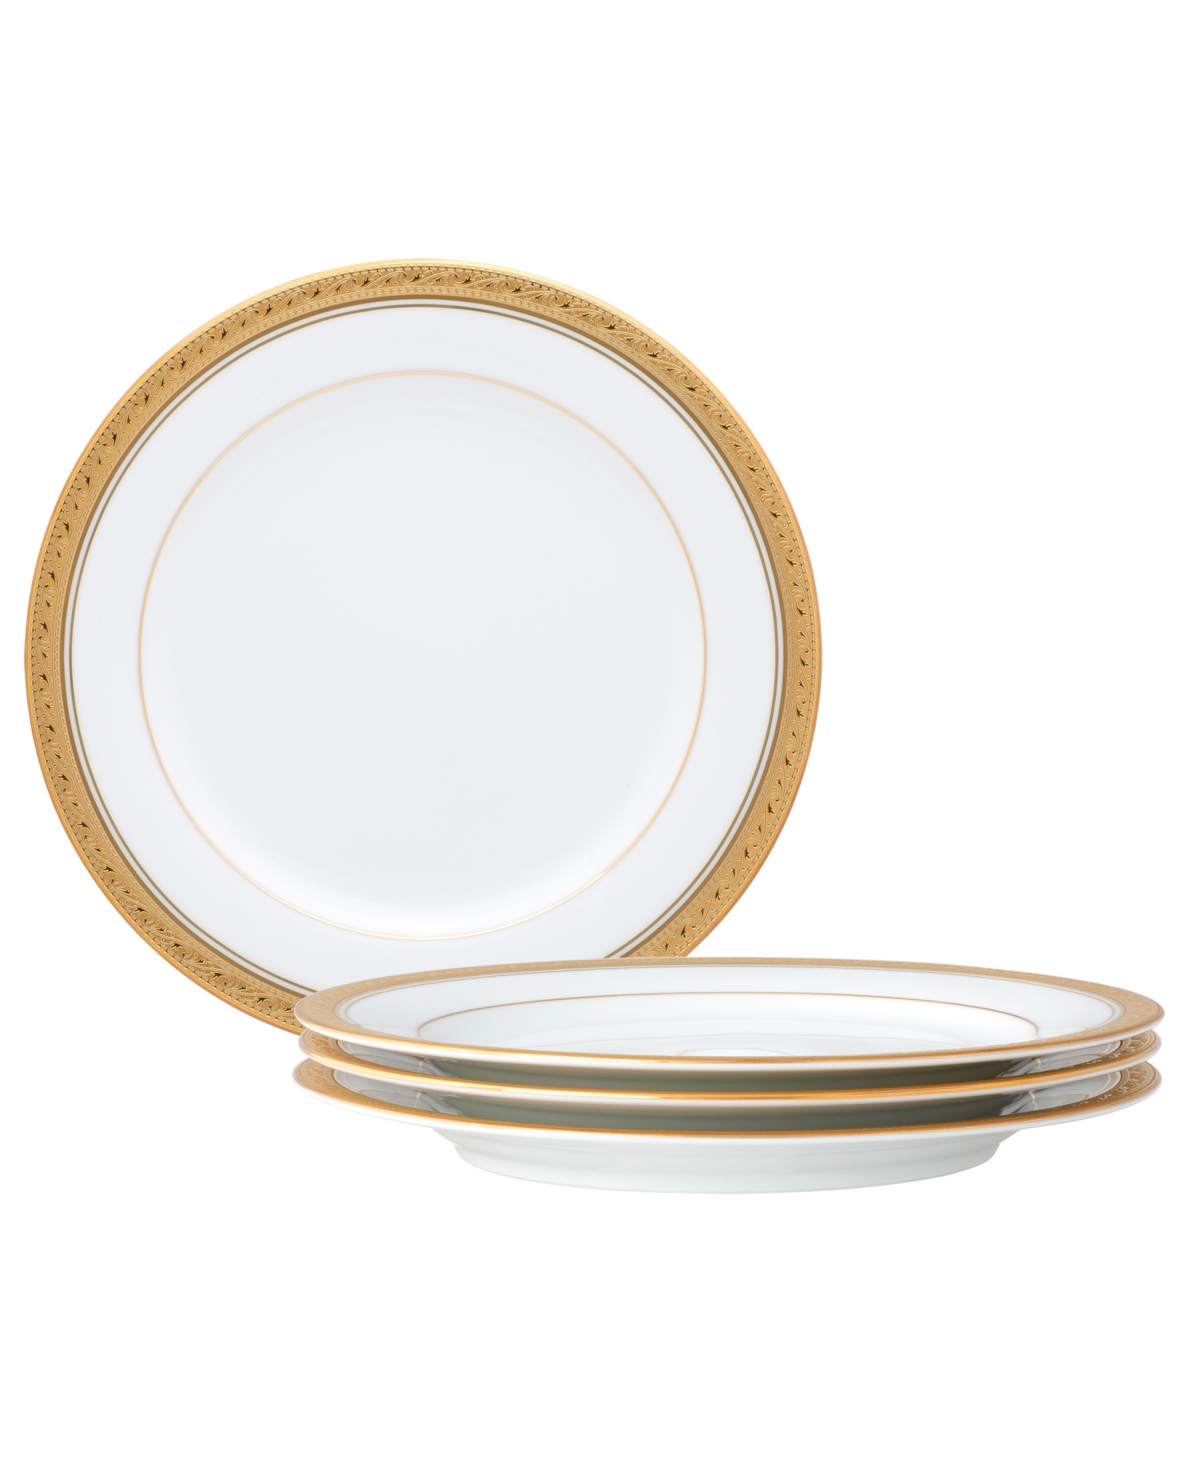 Noritake Crestwood Gold Set Of 4 Salad Plates, Service For 4 In White